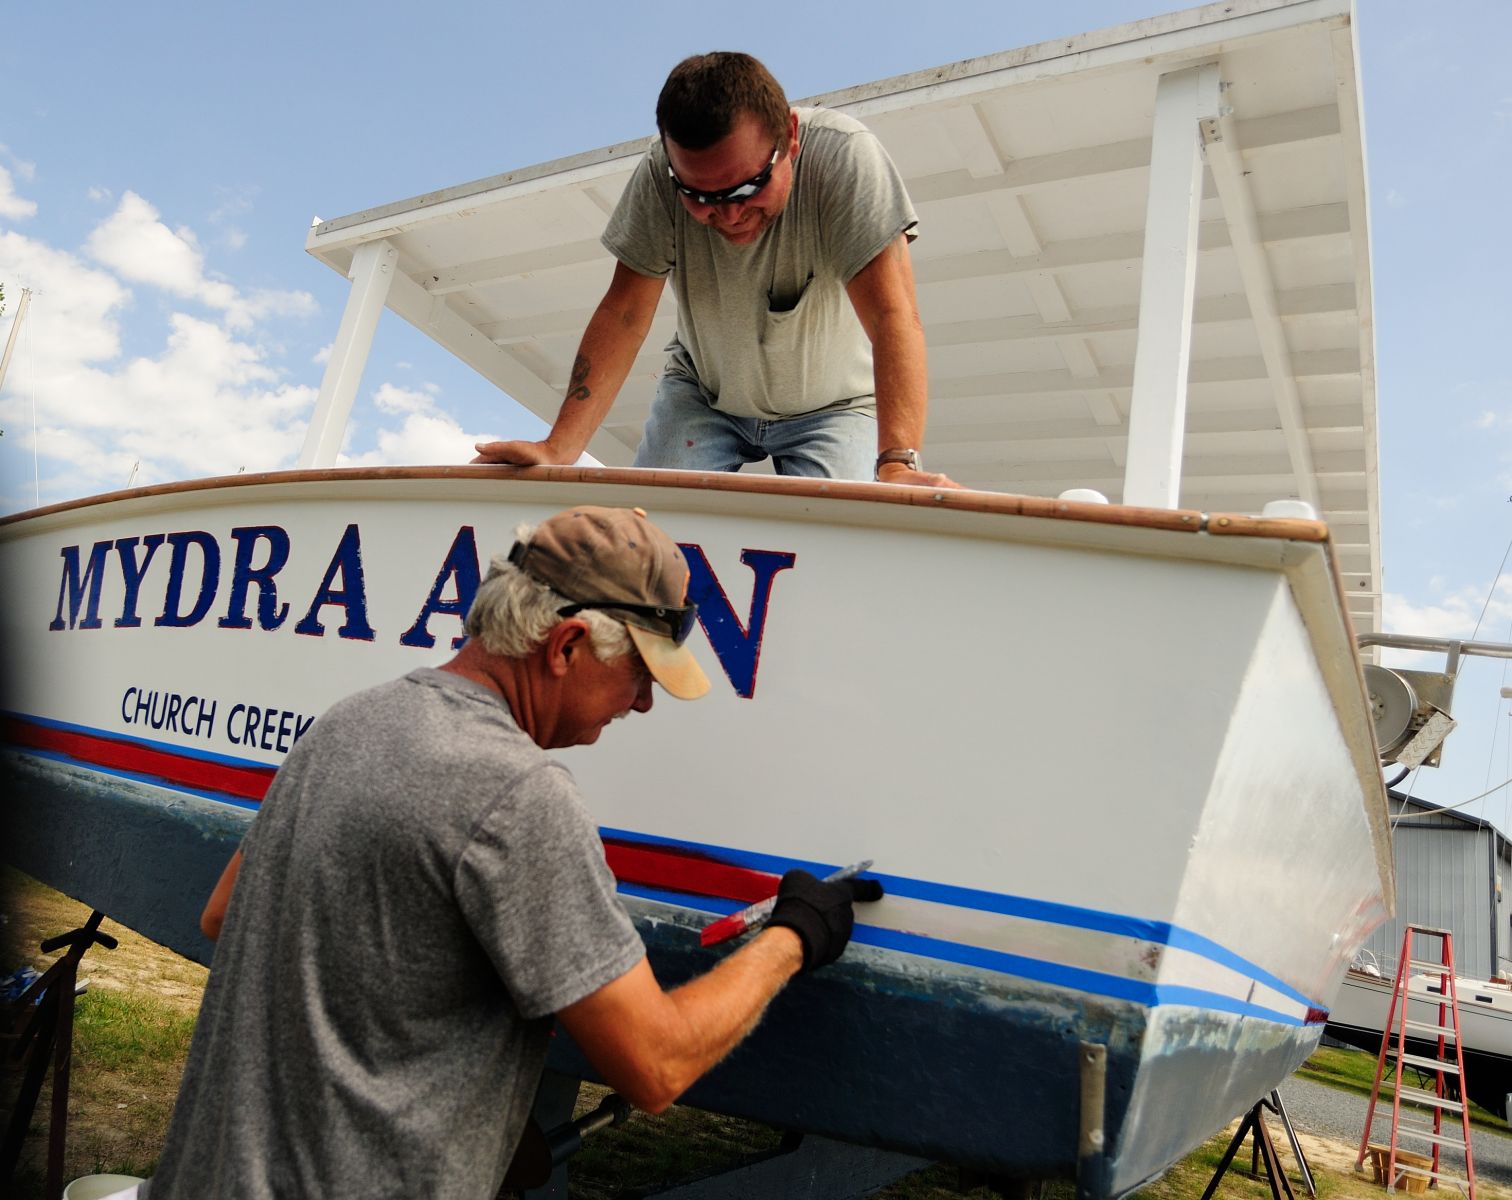 Painting the stern